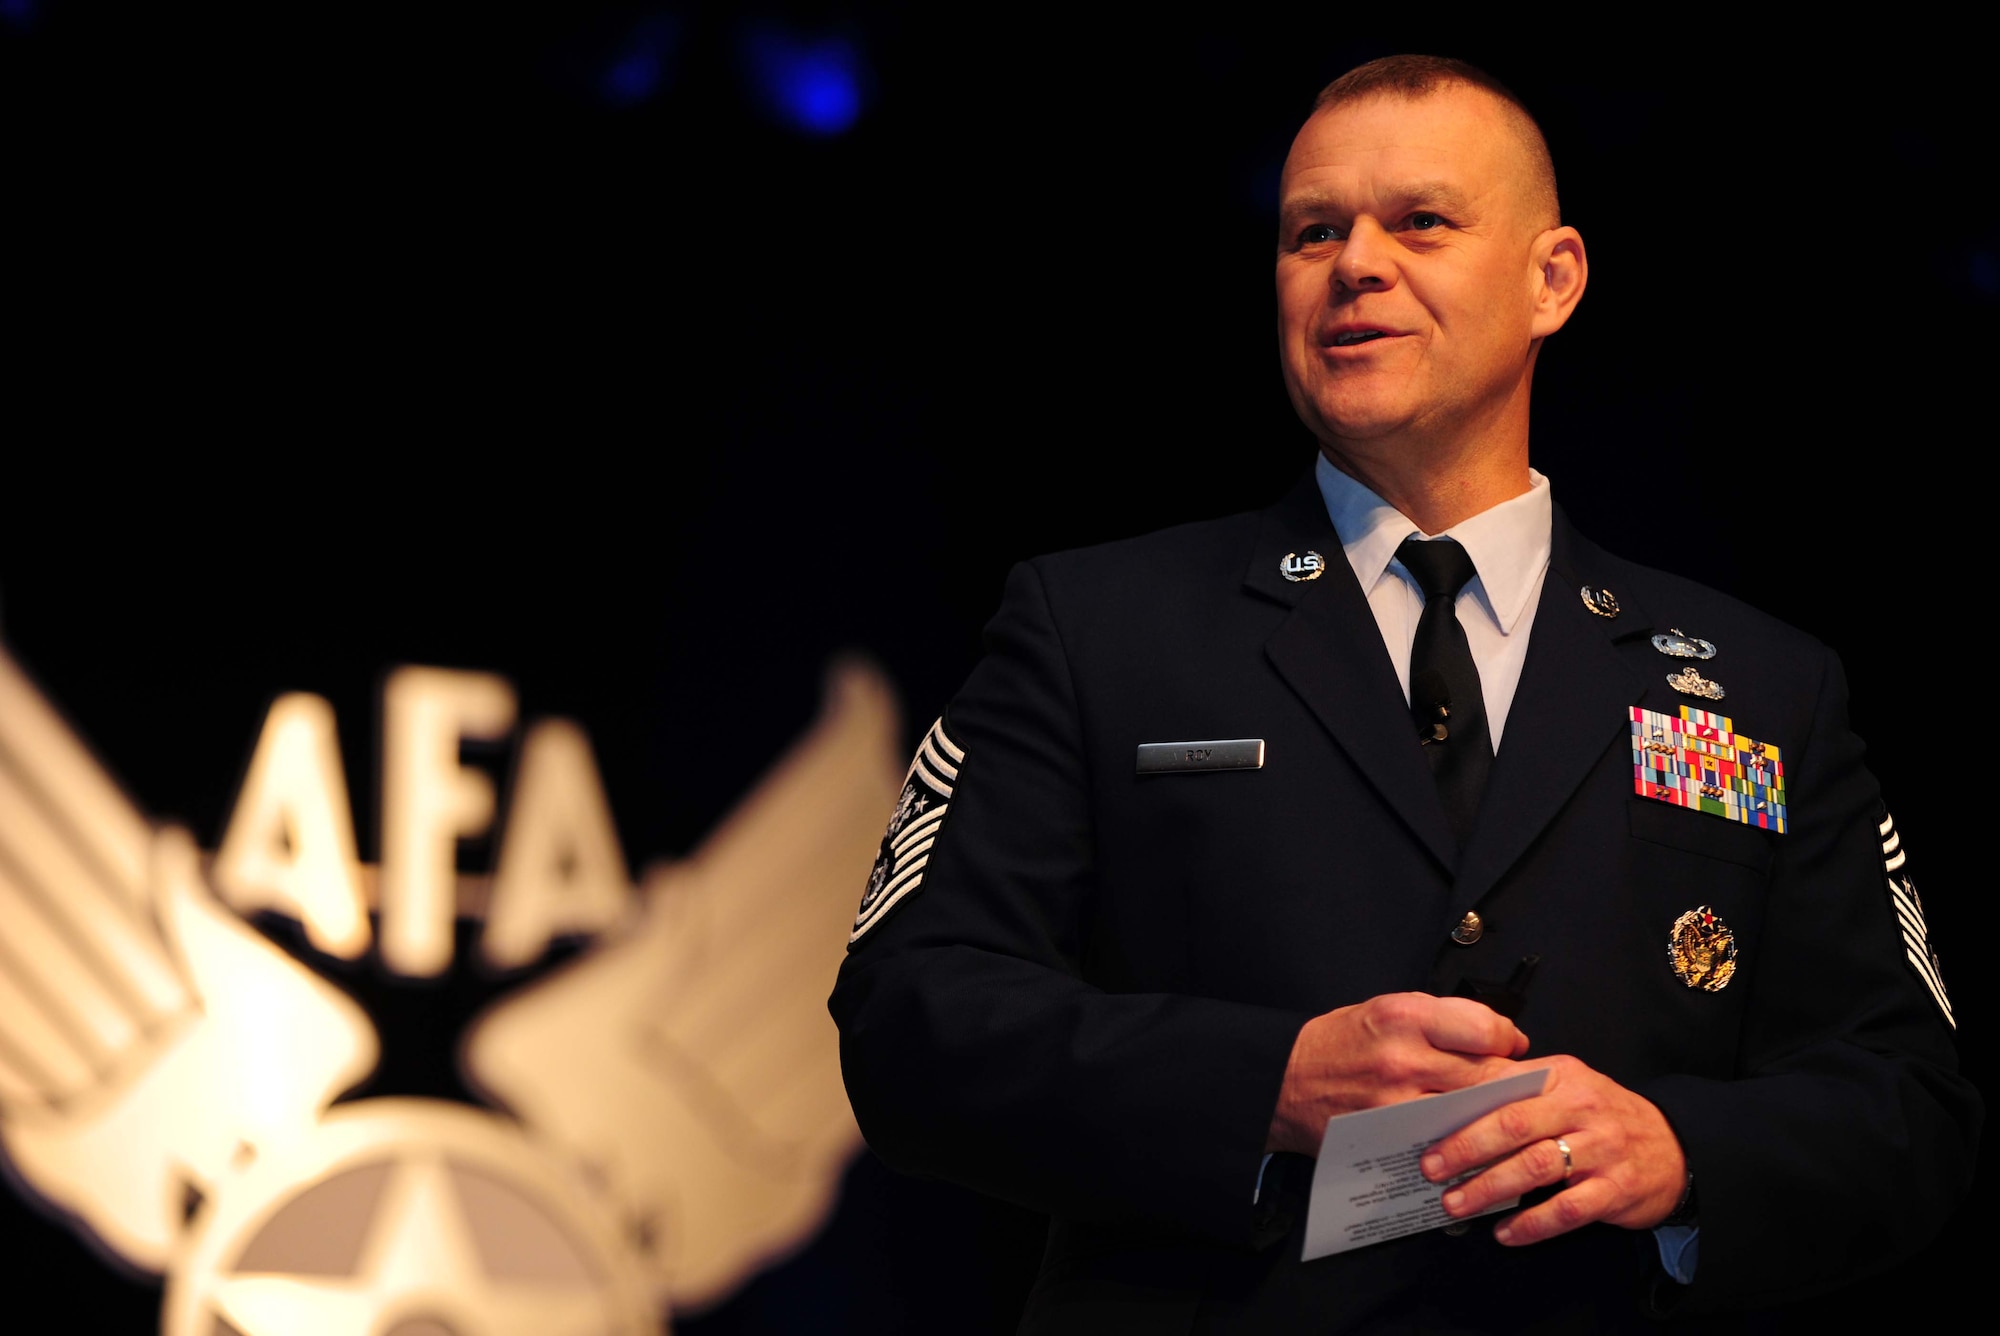 Chief Master Sgt. of the Air Force James A. Roy addresses an audience of Airmen, sister service members and industry partners Sept. 21, 2011, during the Air Force Association’s 2011 Air & Space Conference and Technology Exposition in National Harbor, Md. Roy highlighted issues that are affecting Airmen around the force. (U.S. Air Force photo/ Airman 1st Class Melissa Goslin)